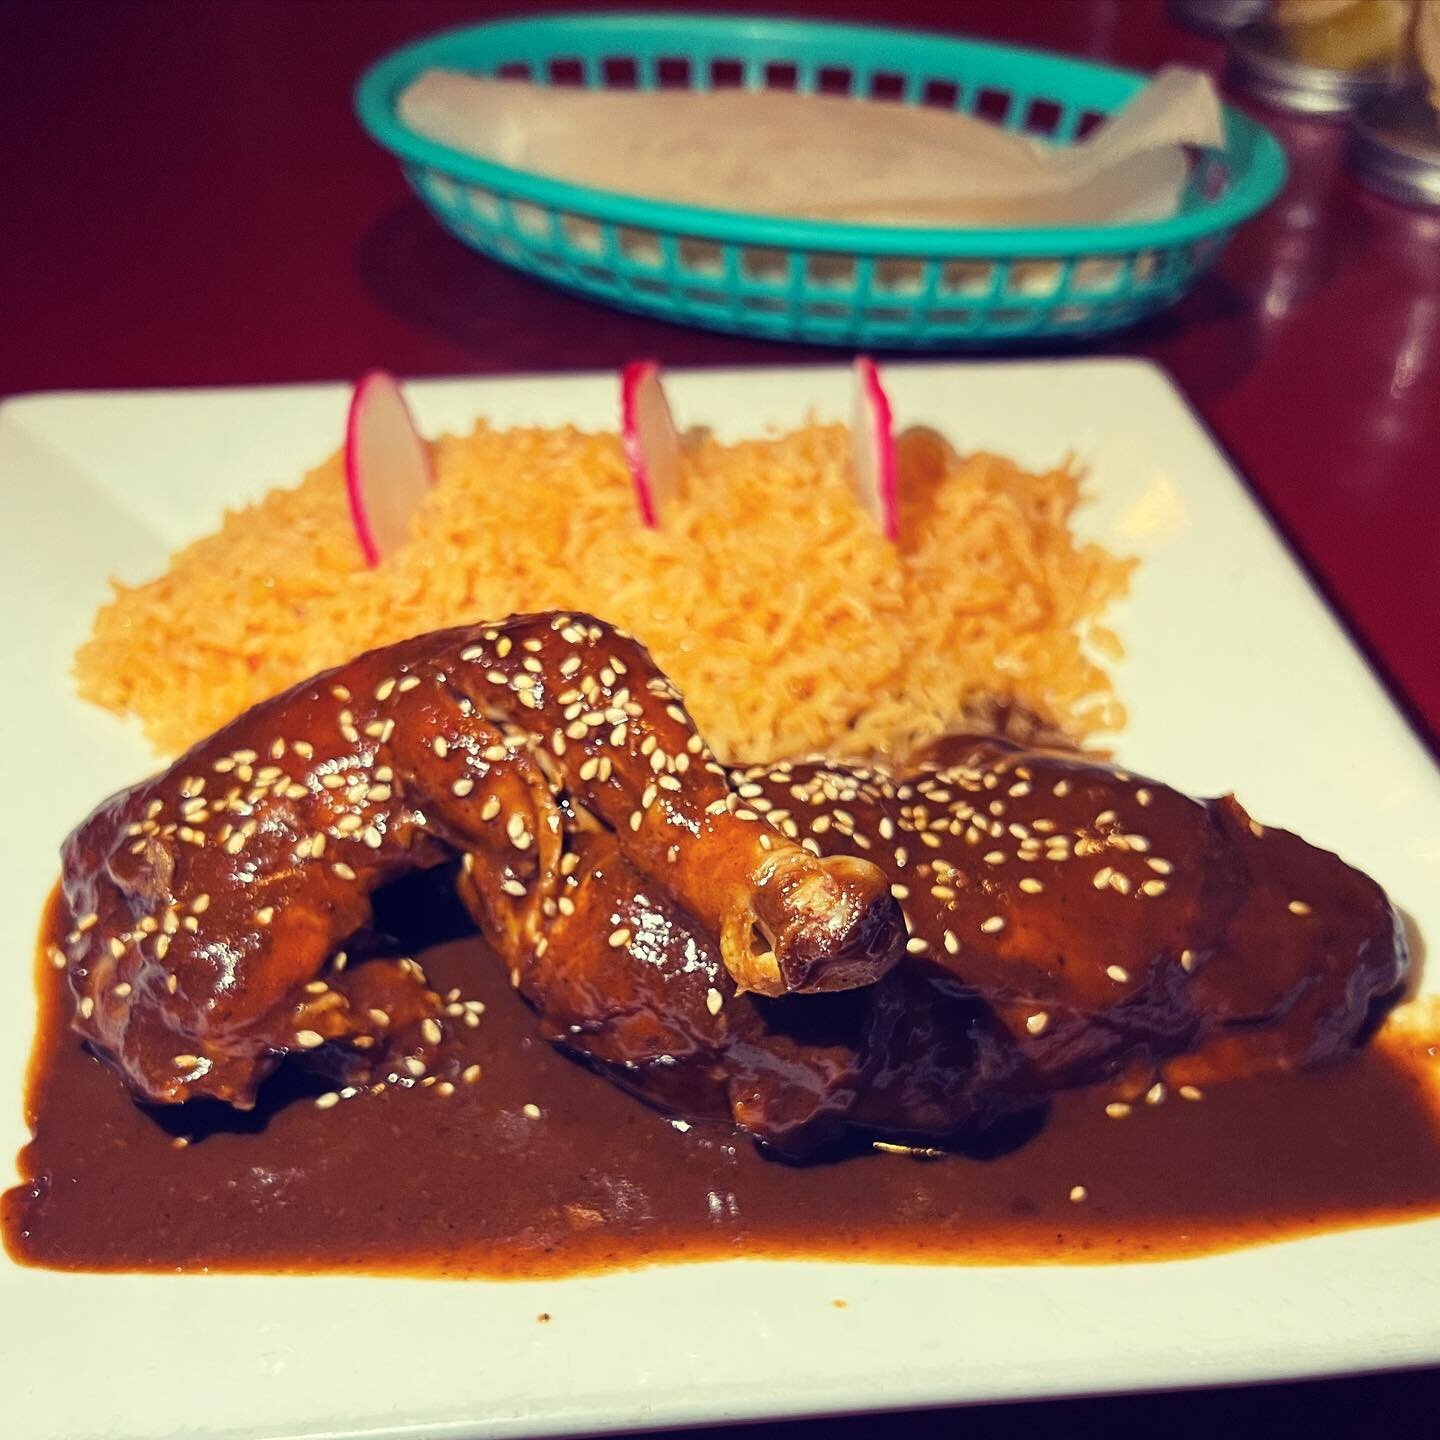 #molepoblano
Homemade mole , made from scratch, one of our top 3 dishes in our menu!! 
So many flavors in one dish!!! 
&mdash;&mdash;&mdash;&mdash;&mdash;&mdash;&mdash;&mdash;
#molepoblano #mexicanfood #sunsetparkbrooklyn #bayridge #foodporn #ilovefo